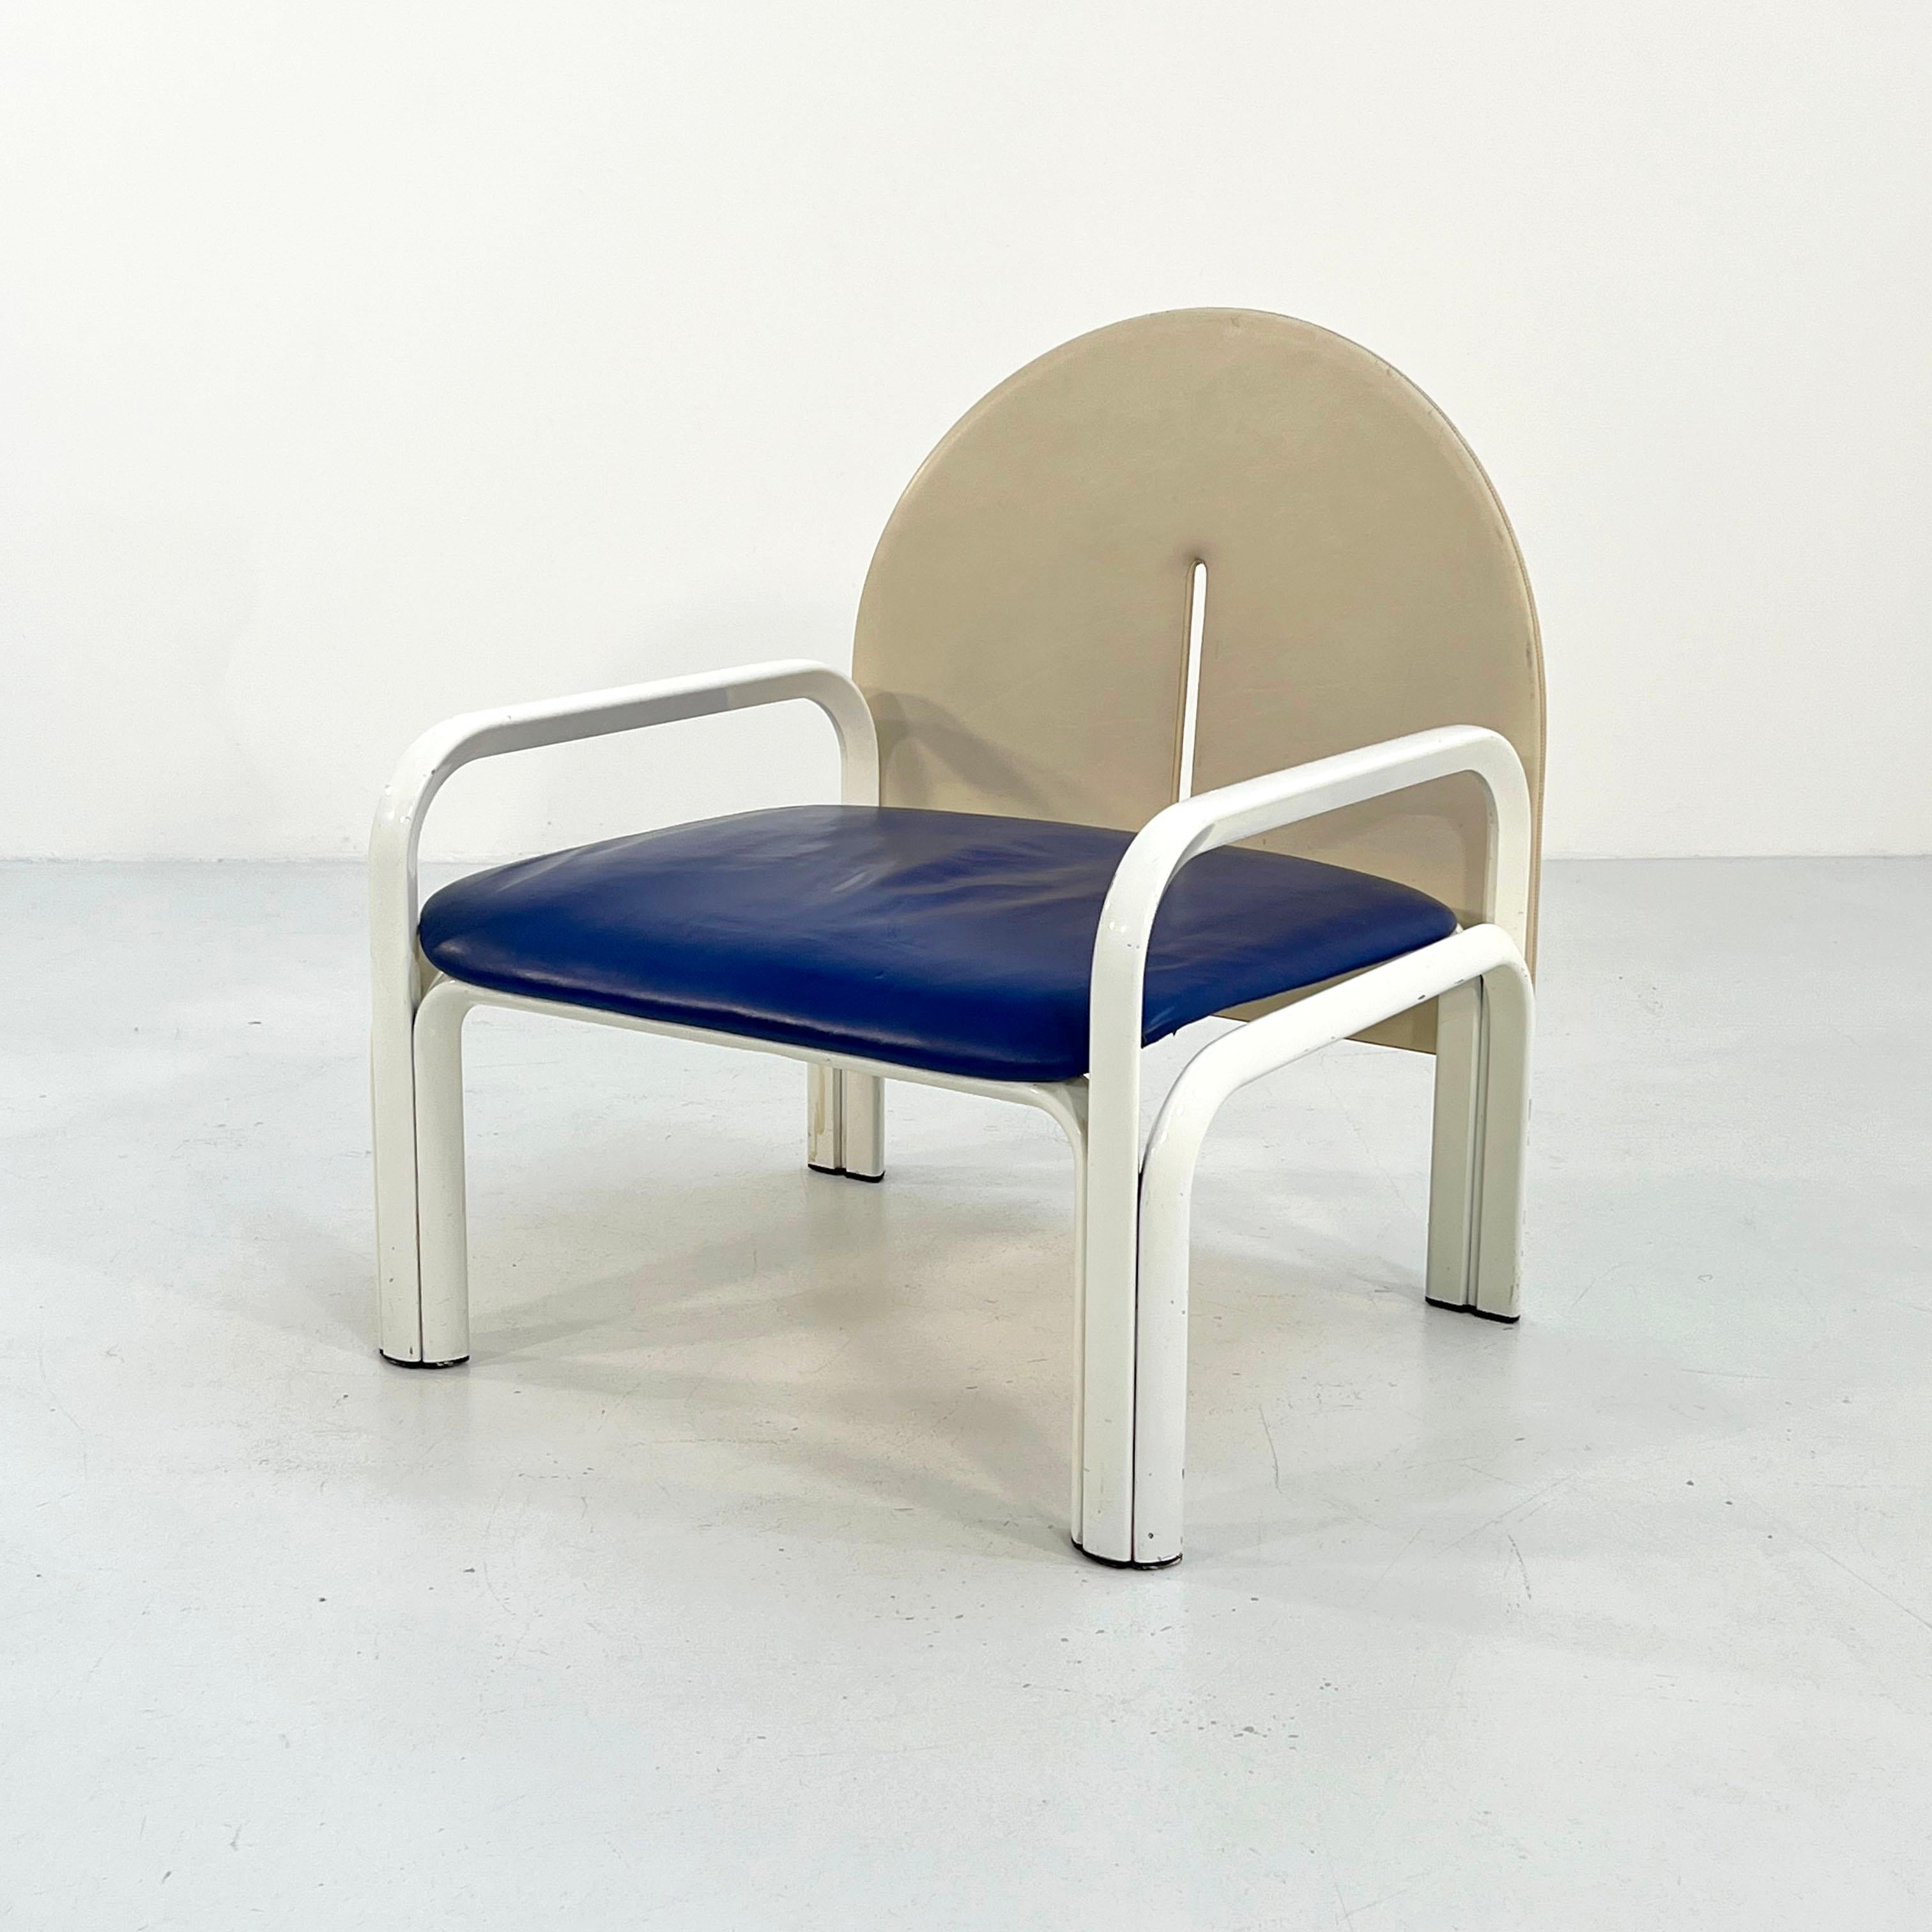 Designer - Gae Aulenti
Producer - Knoll
Model - 54 L armchairs
Design Period - Seventies 
Measurements - Width 70 cm x Depth 61 cm x Height 77 cm x Seat Height 35 cm
Materials - leather, metal
Color - White, Beige, Blue
In its own element.